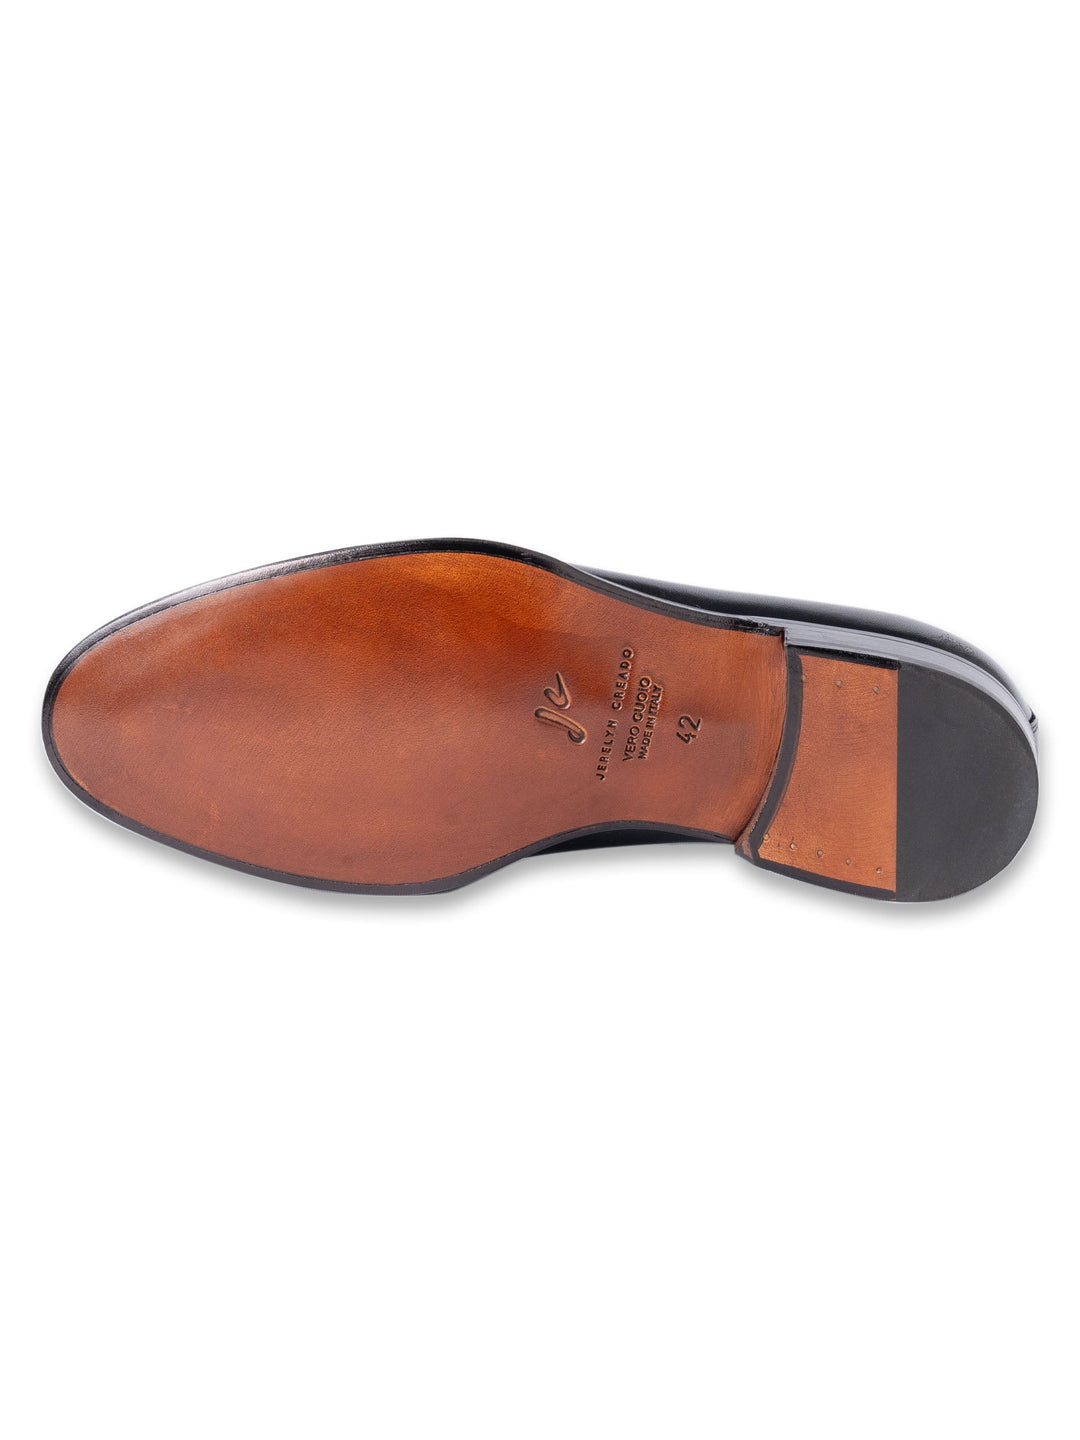 Leather sole of a formal men's shoe with size 42 marking